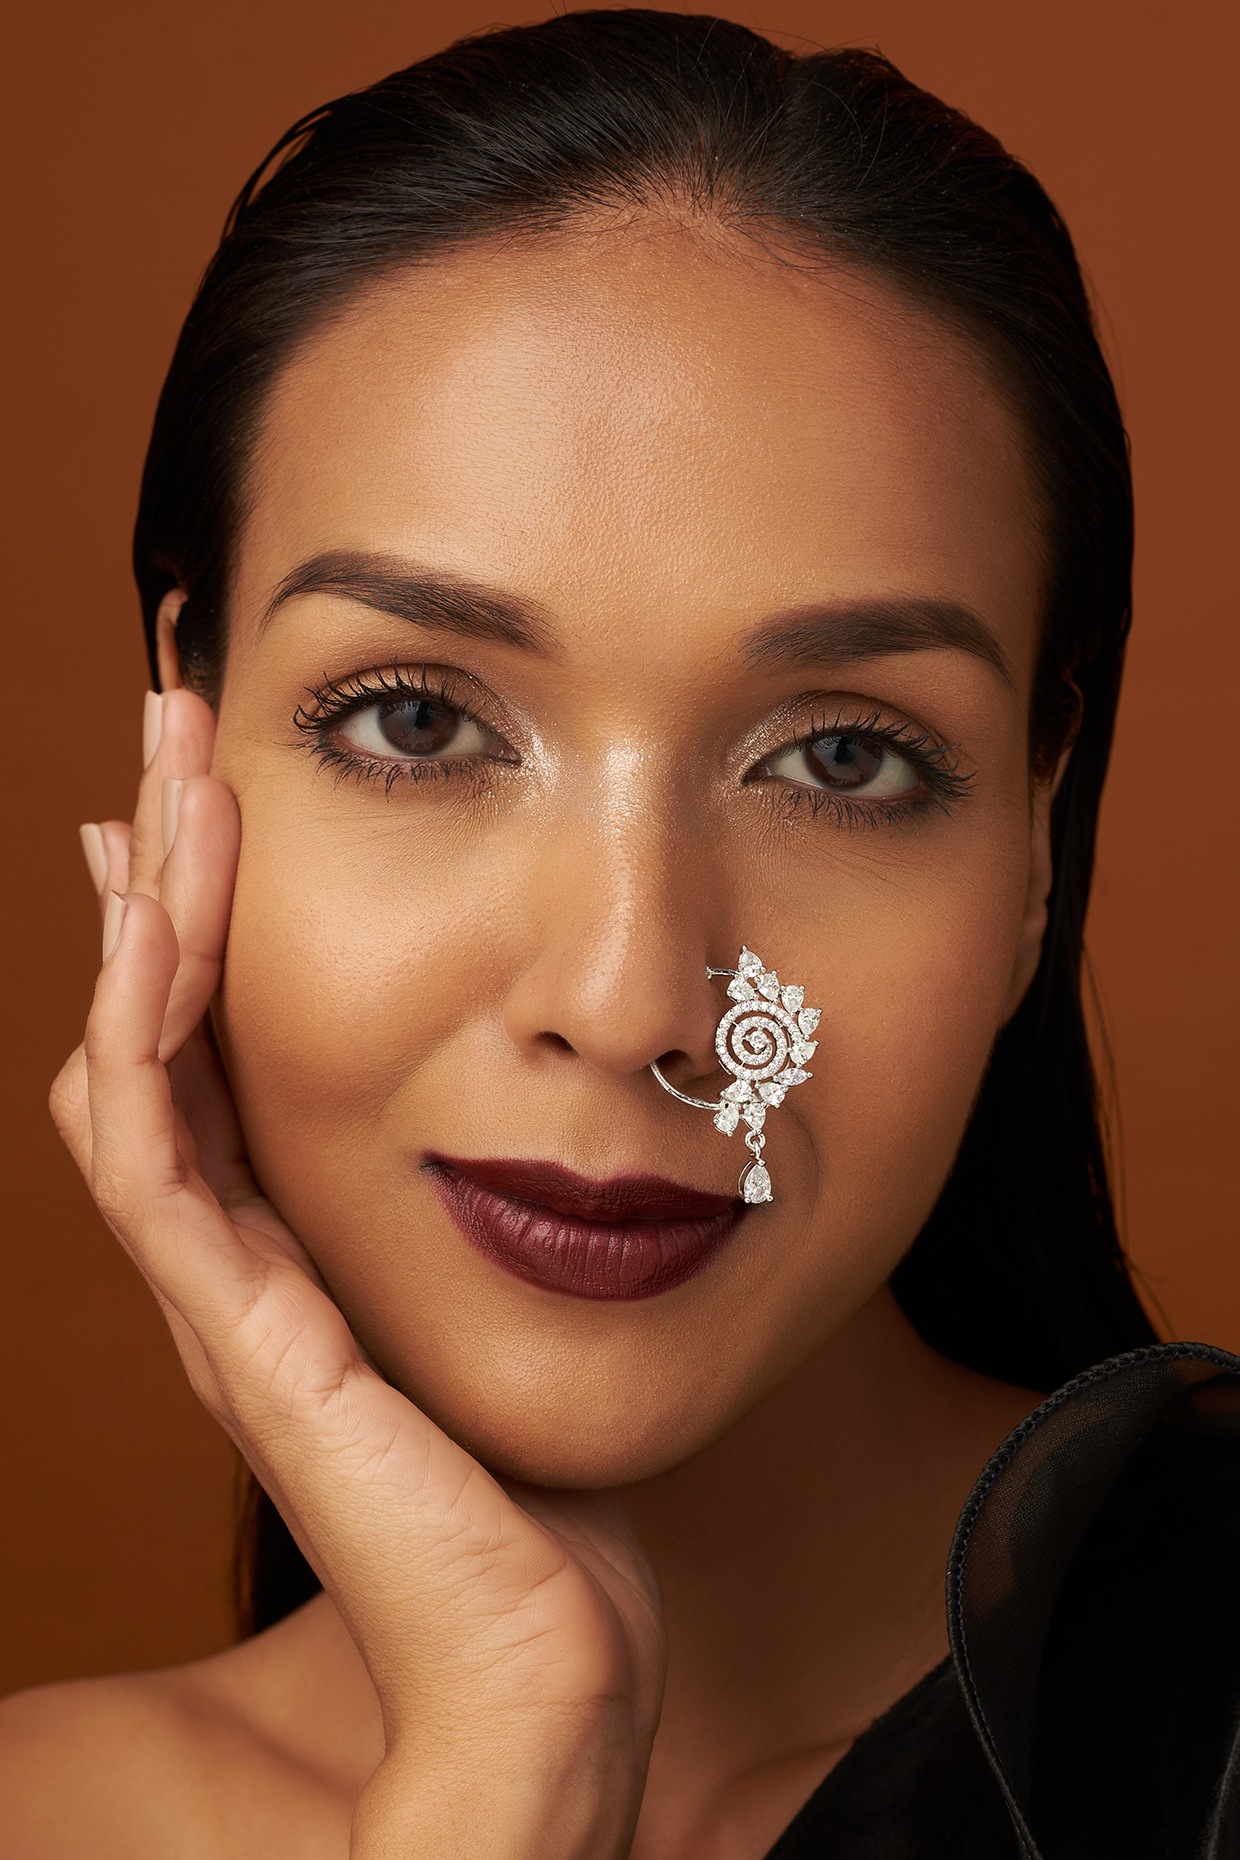 Stylish American Diamond Studded Piercing Nose Ring For Women – 𝗔𝘀𝗽  𝗙𝗮𝘀𝗵𝗶𝗼𝗻 𝗝𝗲𝘄𝗲𝗹𝗹𝗲𝗿𝘆